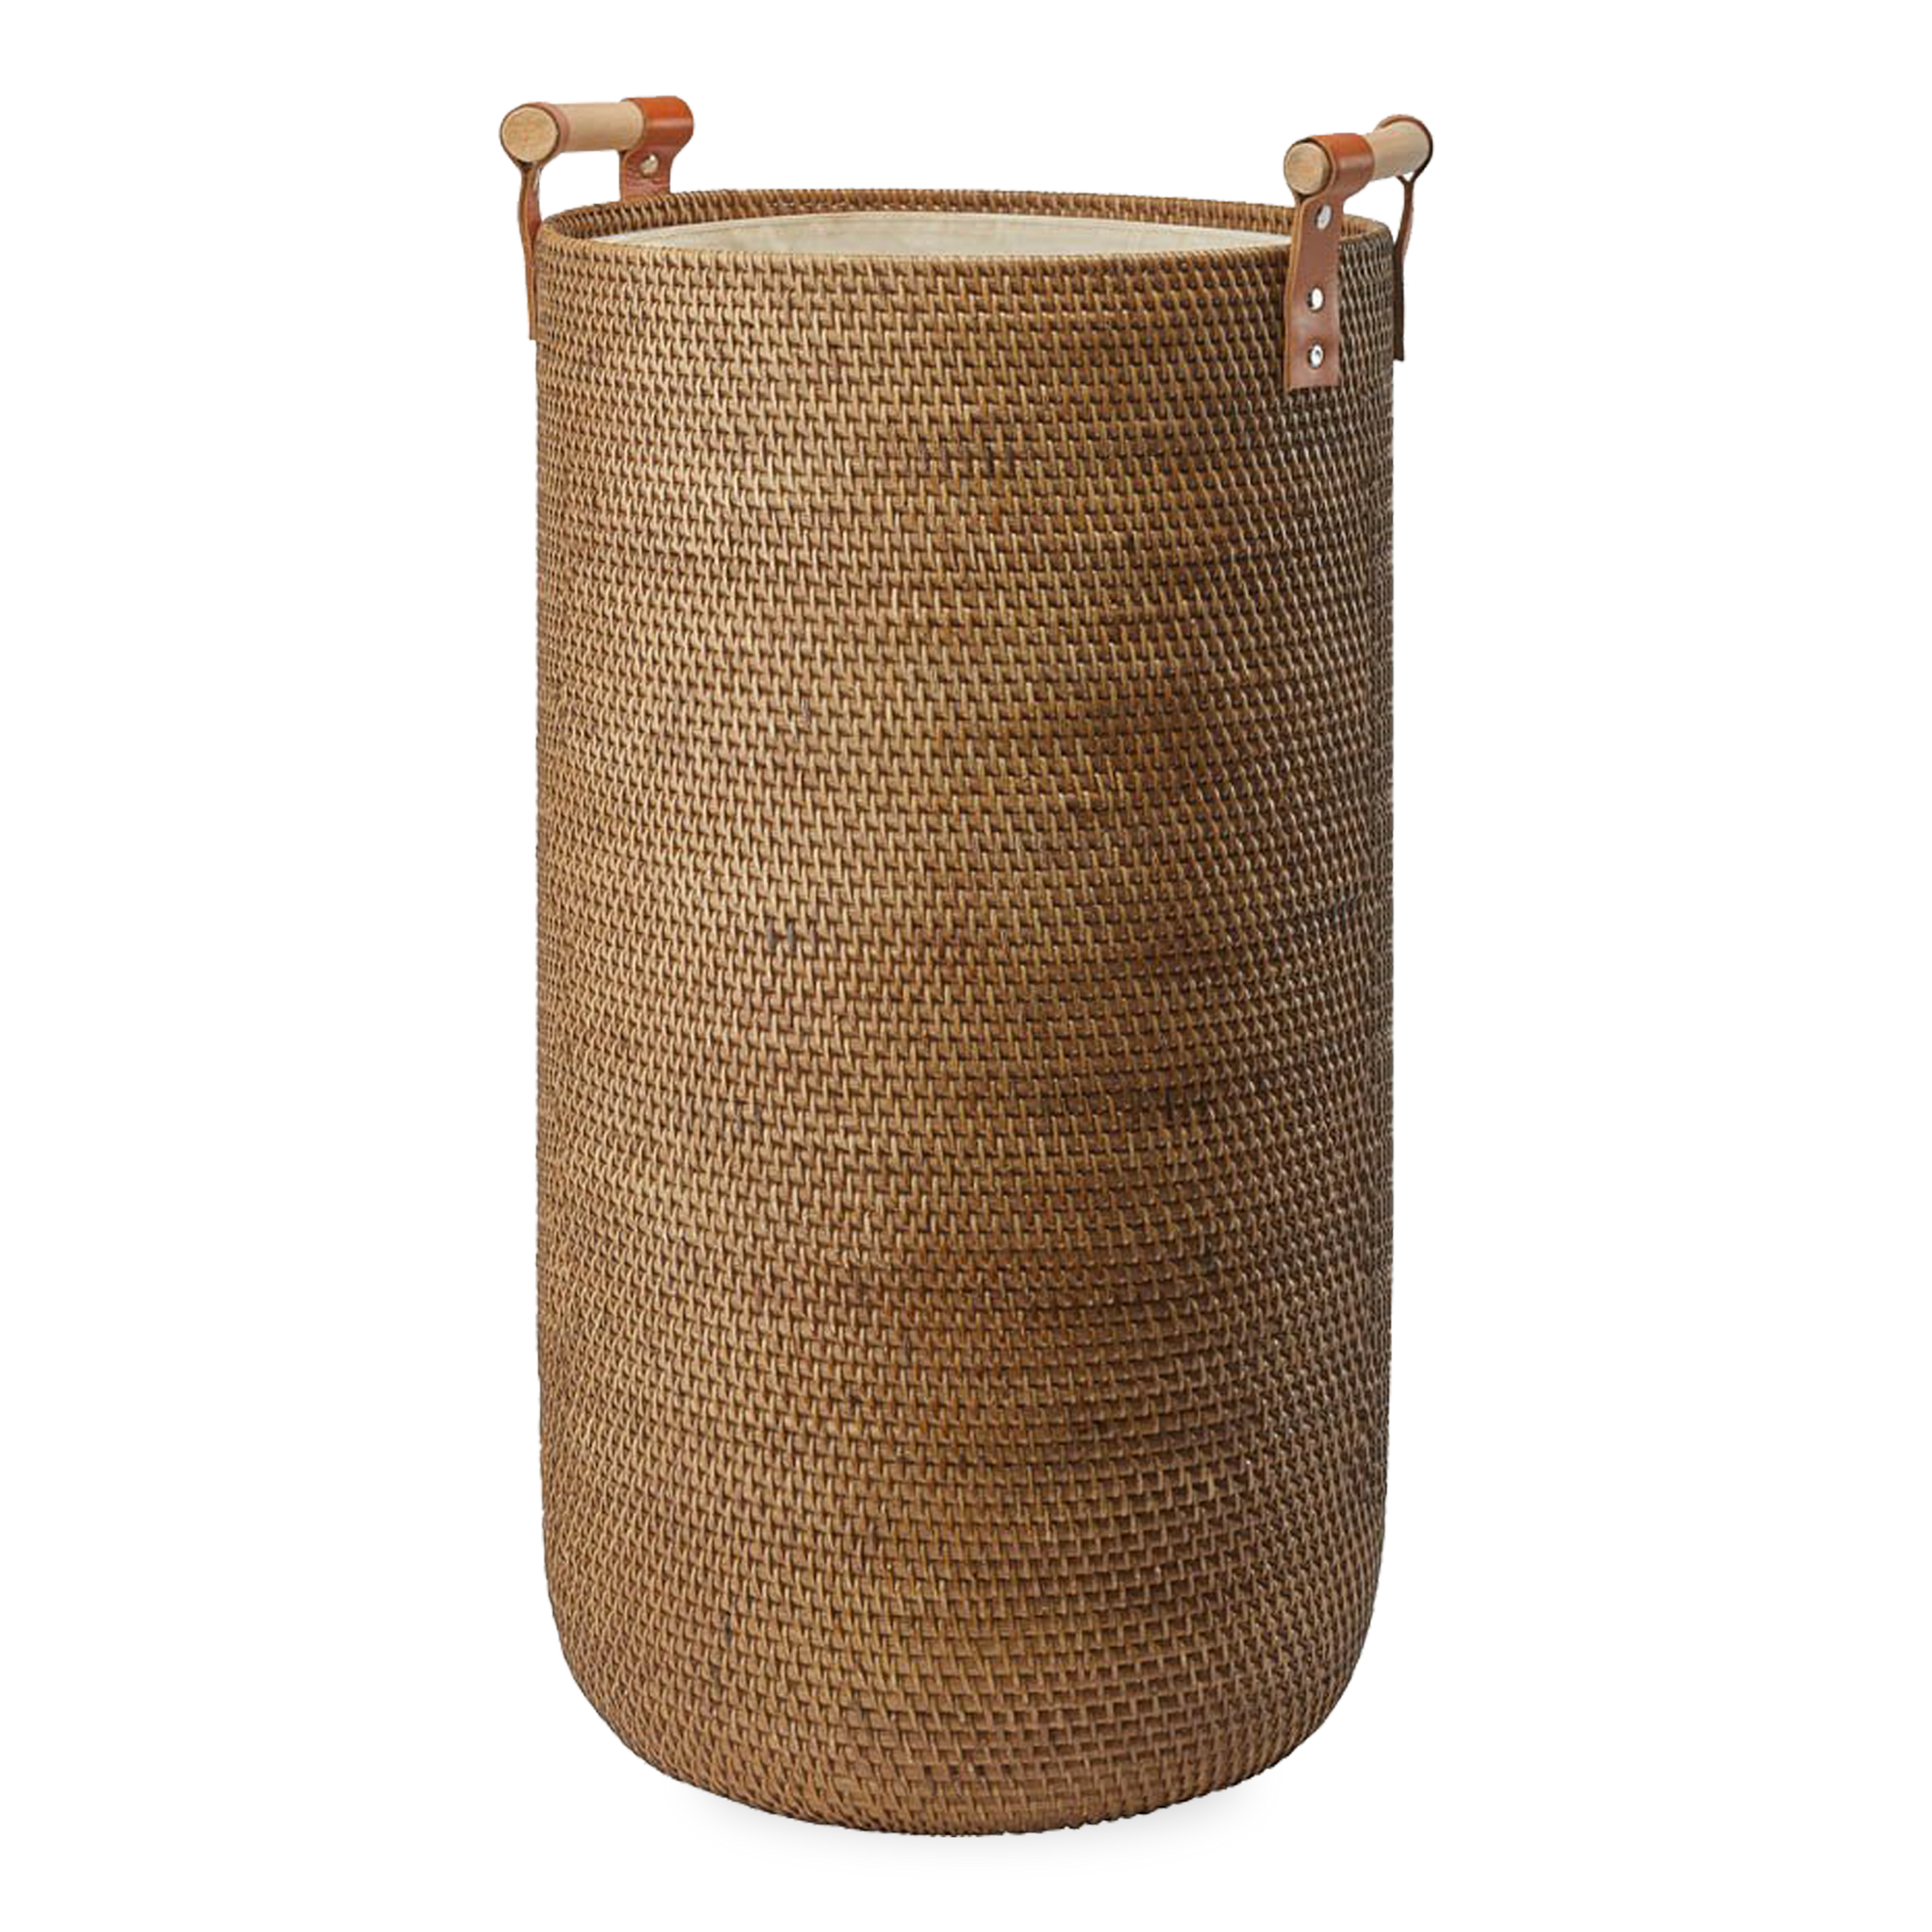 This basket is handcrafted from 100% rattan material with classic leather and rattan handles.